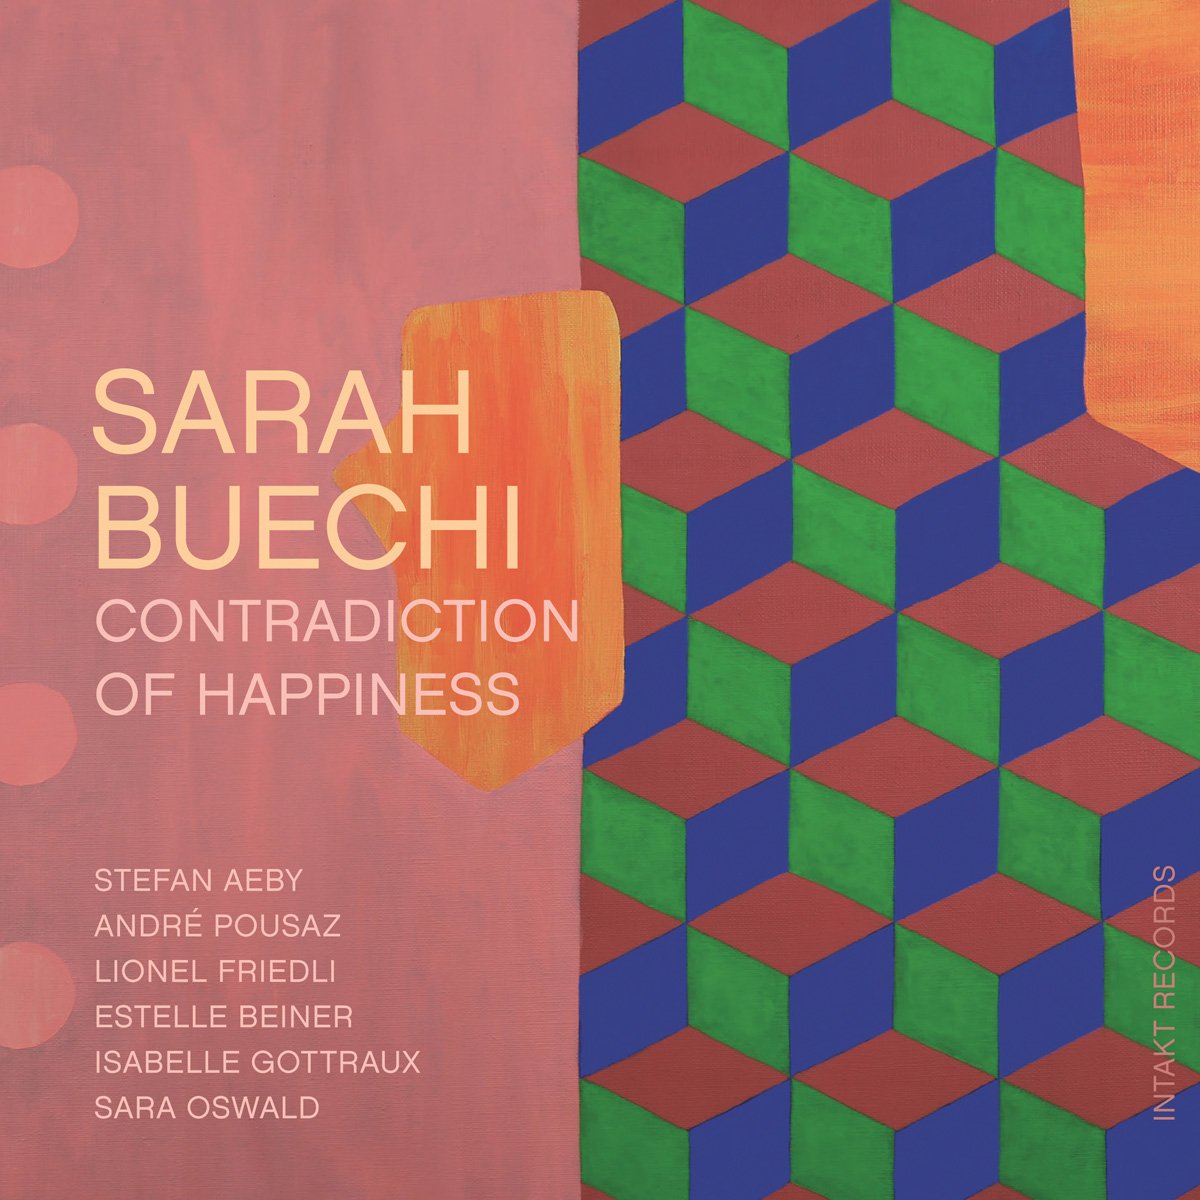 New release in February 2018: Sarah Buechi. Contradiction of Happiness. With Sarah Buechi, Stefan Aeby, André Pousaz, Lionel Friedli, Estelle Beiner, Isabelle Gottraux, Sara Oswald. Intakt CD 299. intaktrec.ch/299-a.htm